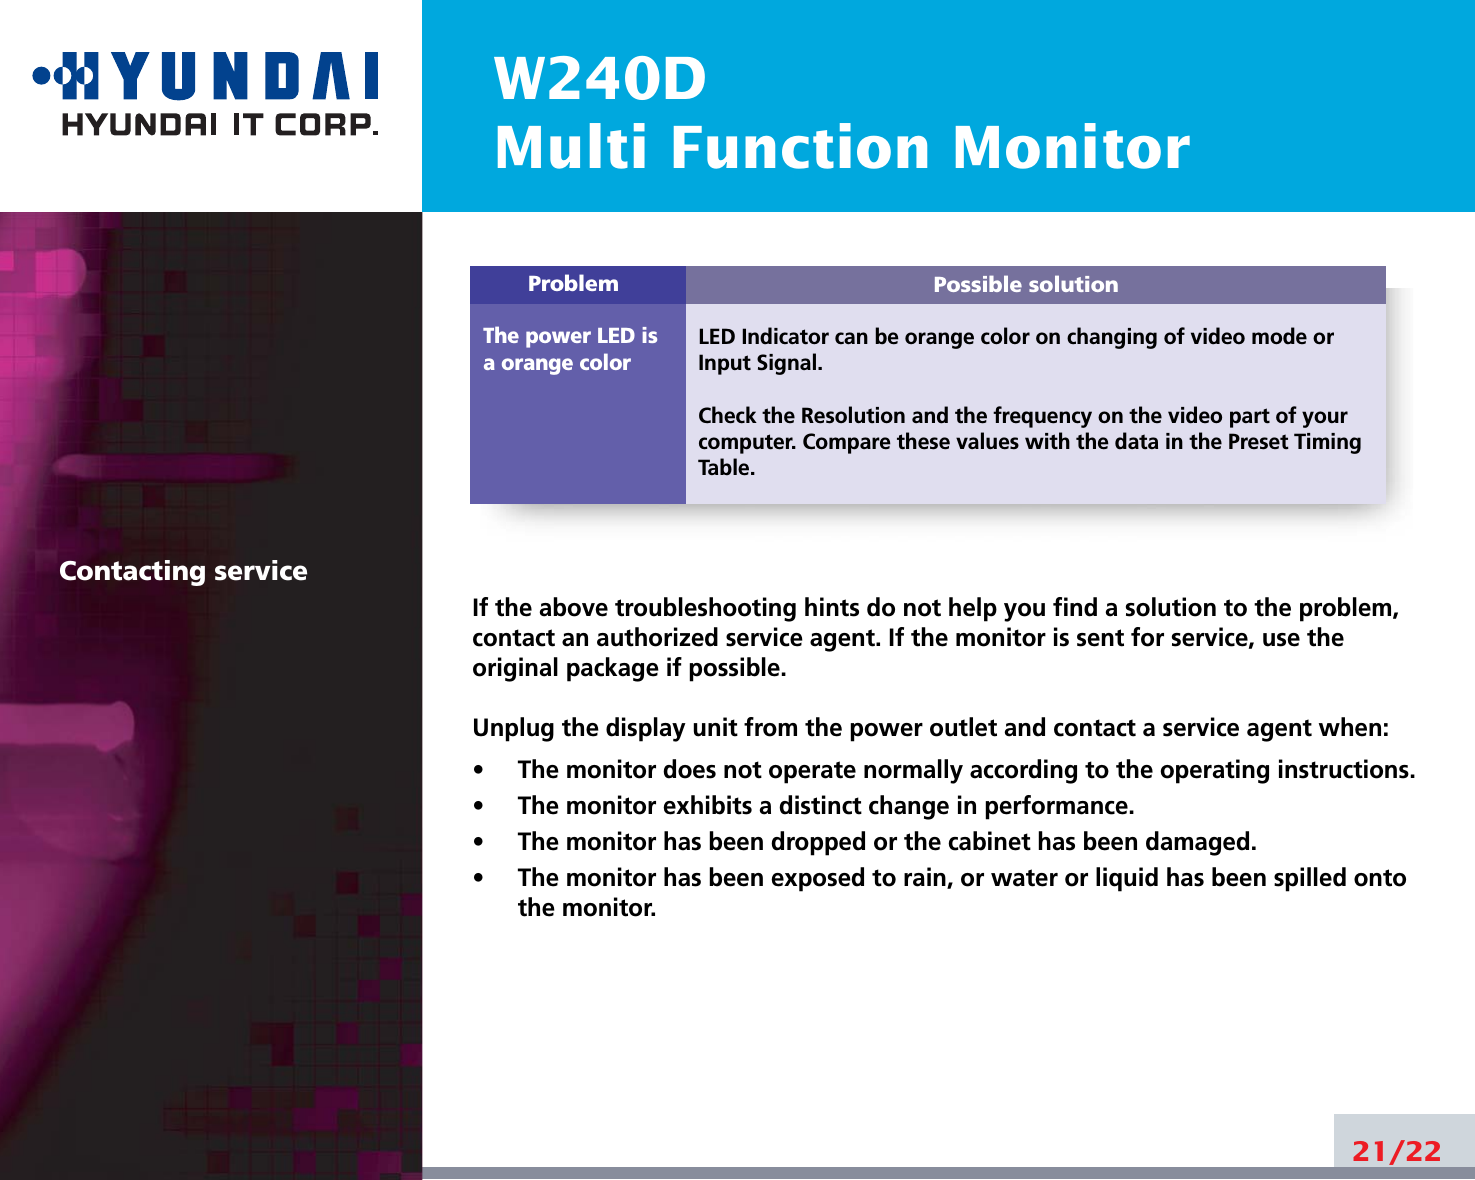 W240DMulti Function Monitor21/22Possible solutionLED Indicator can be orange color on changing of video mode orInput Signal.Check the Resolution and the frequency on the video part of yourcomputer. Compare these values with the data in the Preset TimingTable.ProblemThe power LED isa orange colorContacting serviceIf the above troubleshooting hints do not help you find a solution to the problem,contact an authorized service agent. If the monitor is sent for service, use theoriginal package if possible.Unplug the display unit from the power outlet and contact a service agent when:•     The monitor does not operate normally according to the operating instructions.•     The monitor exhibits a distinct change in performance.•     The monitor has been dropped or the cabinet has been damaged.•     The monitor has been exposed to rain, or water or liquid has been spilled ontothe monitor.